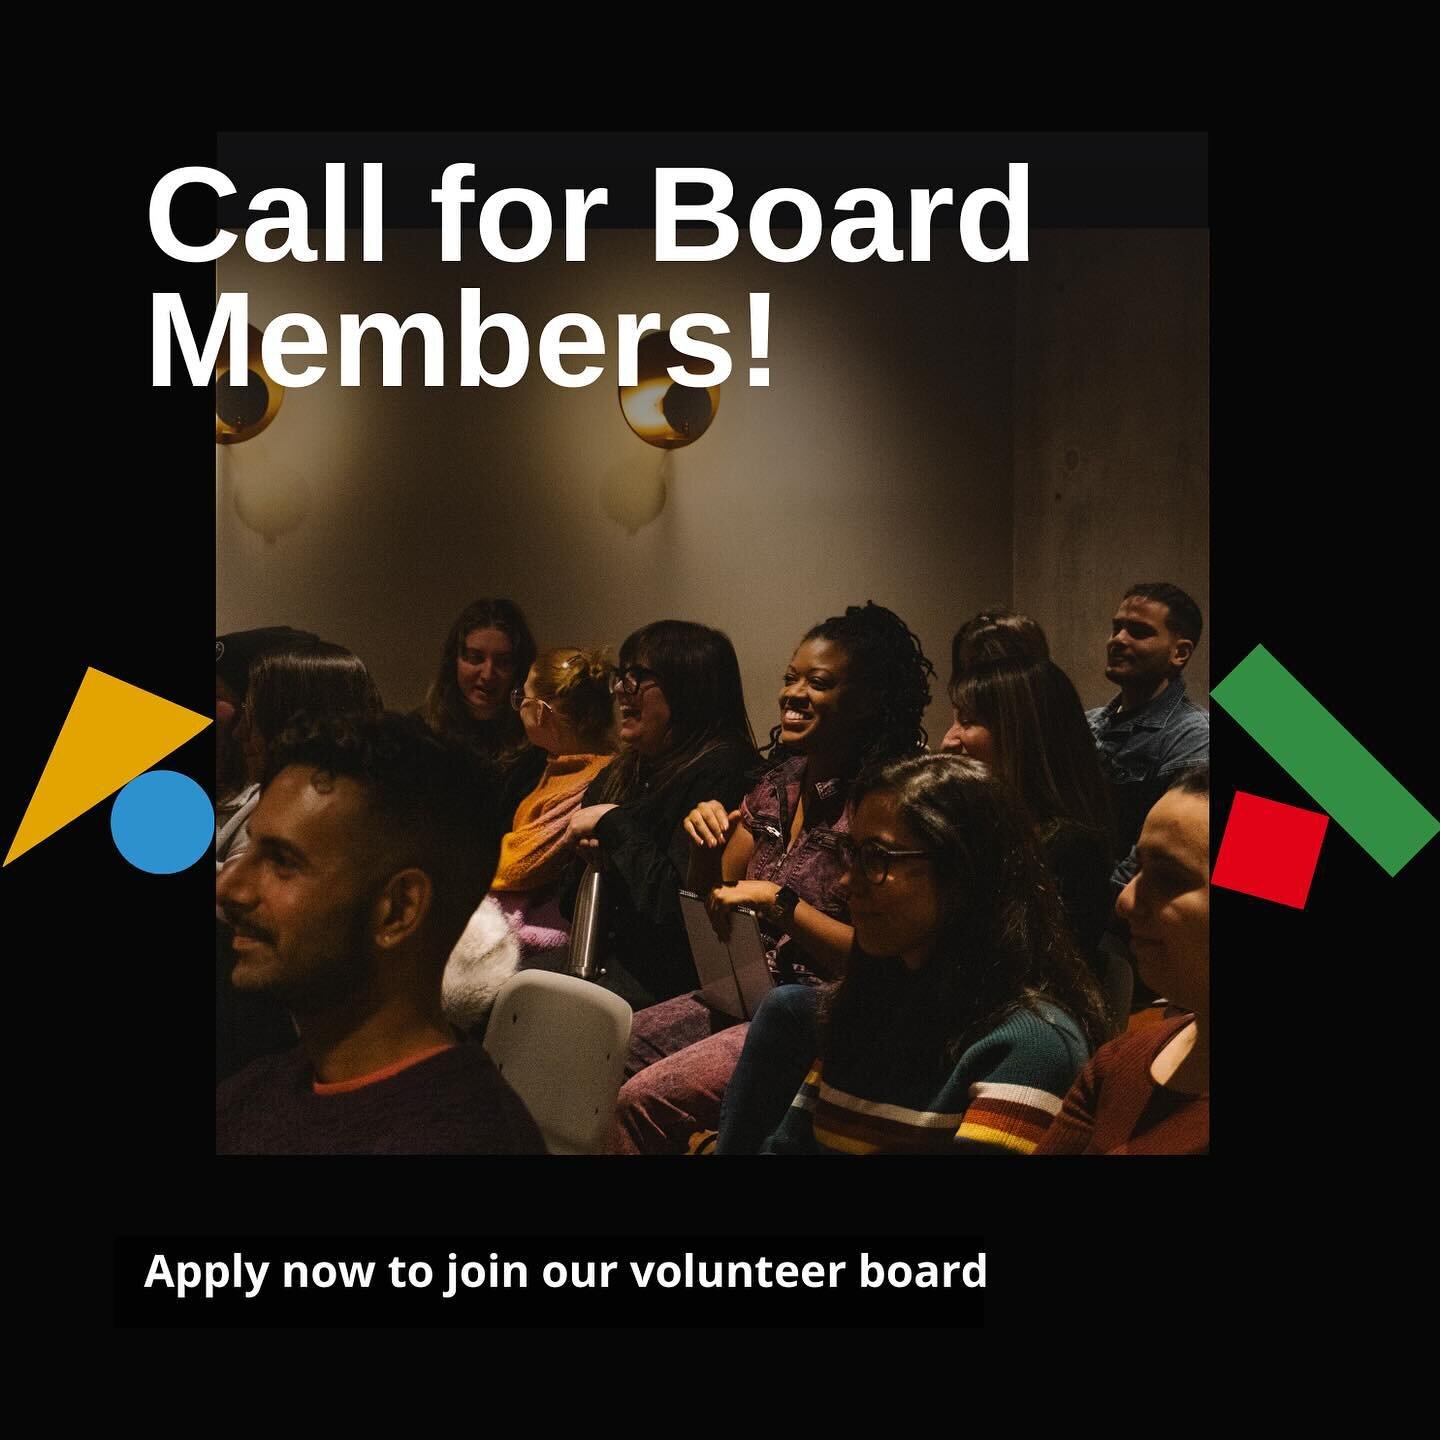 Apply to join our volunteer Board of Directors! We&rsquo;re looking for collaborative thinkers with a passion for the arts from all backgrounds (including youth!).